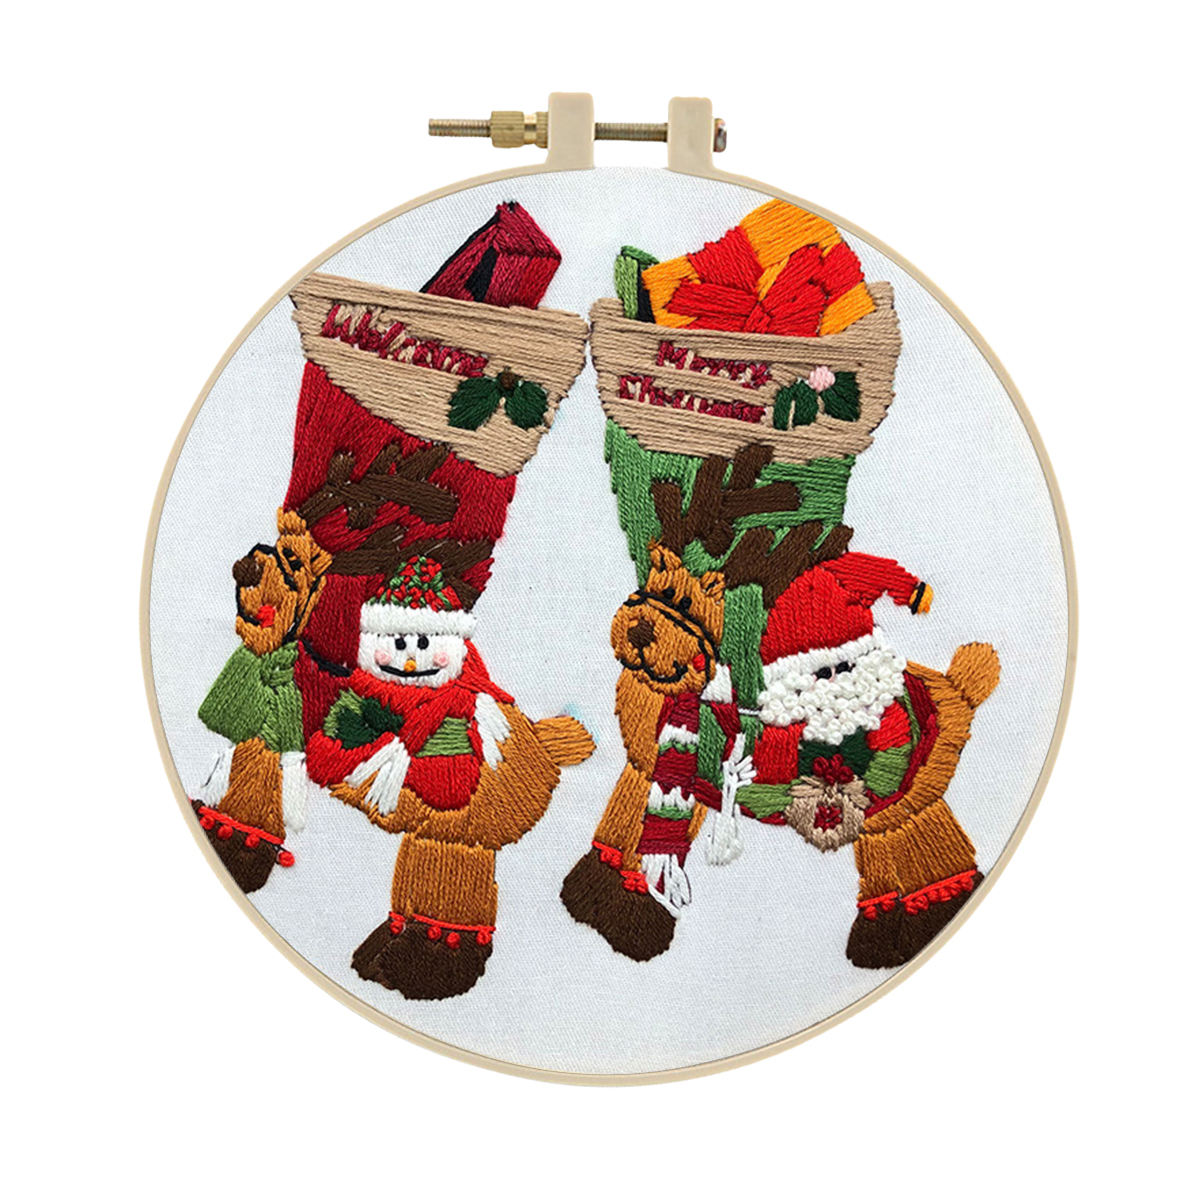 Christmas Embroidery Kits Cross stitch kits for Adult Beginner - Two Cute Socks pattern